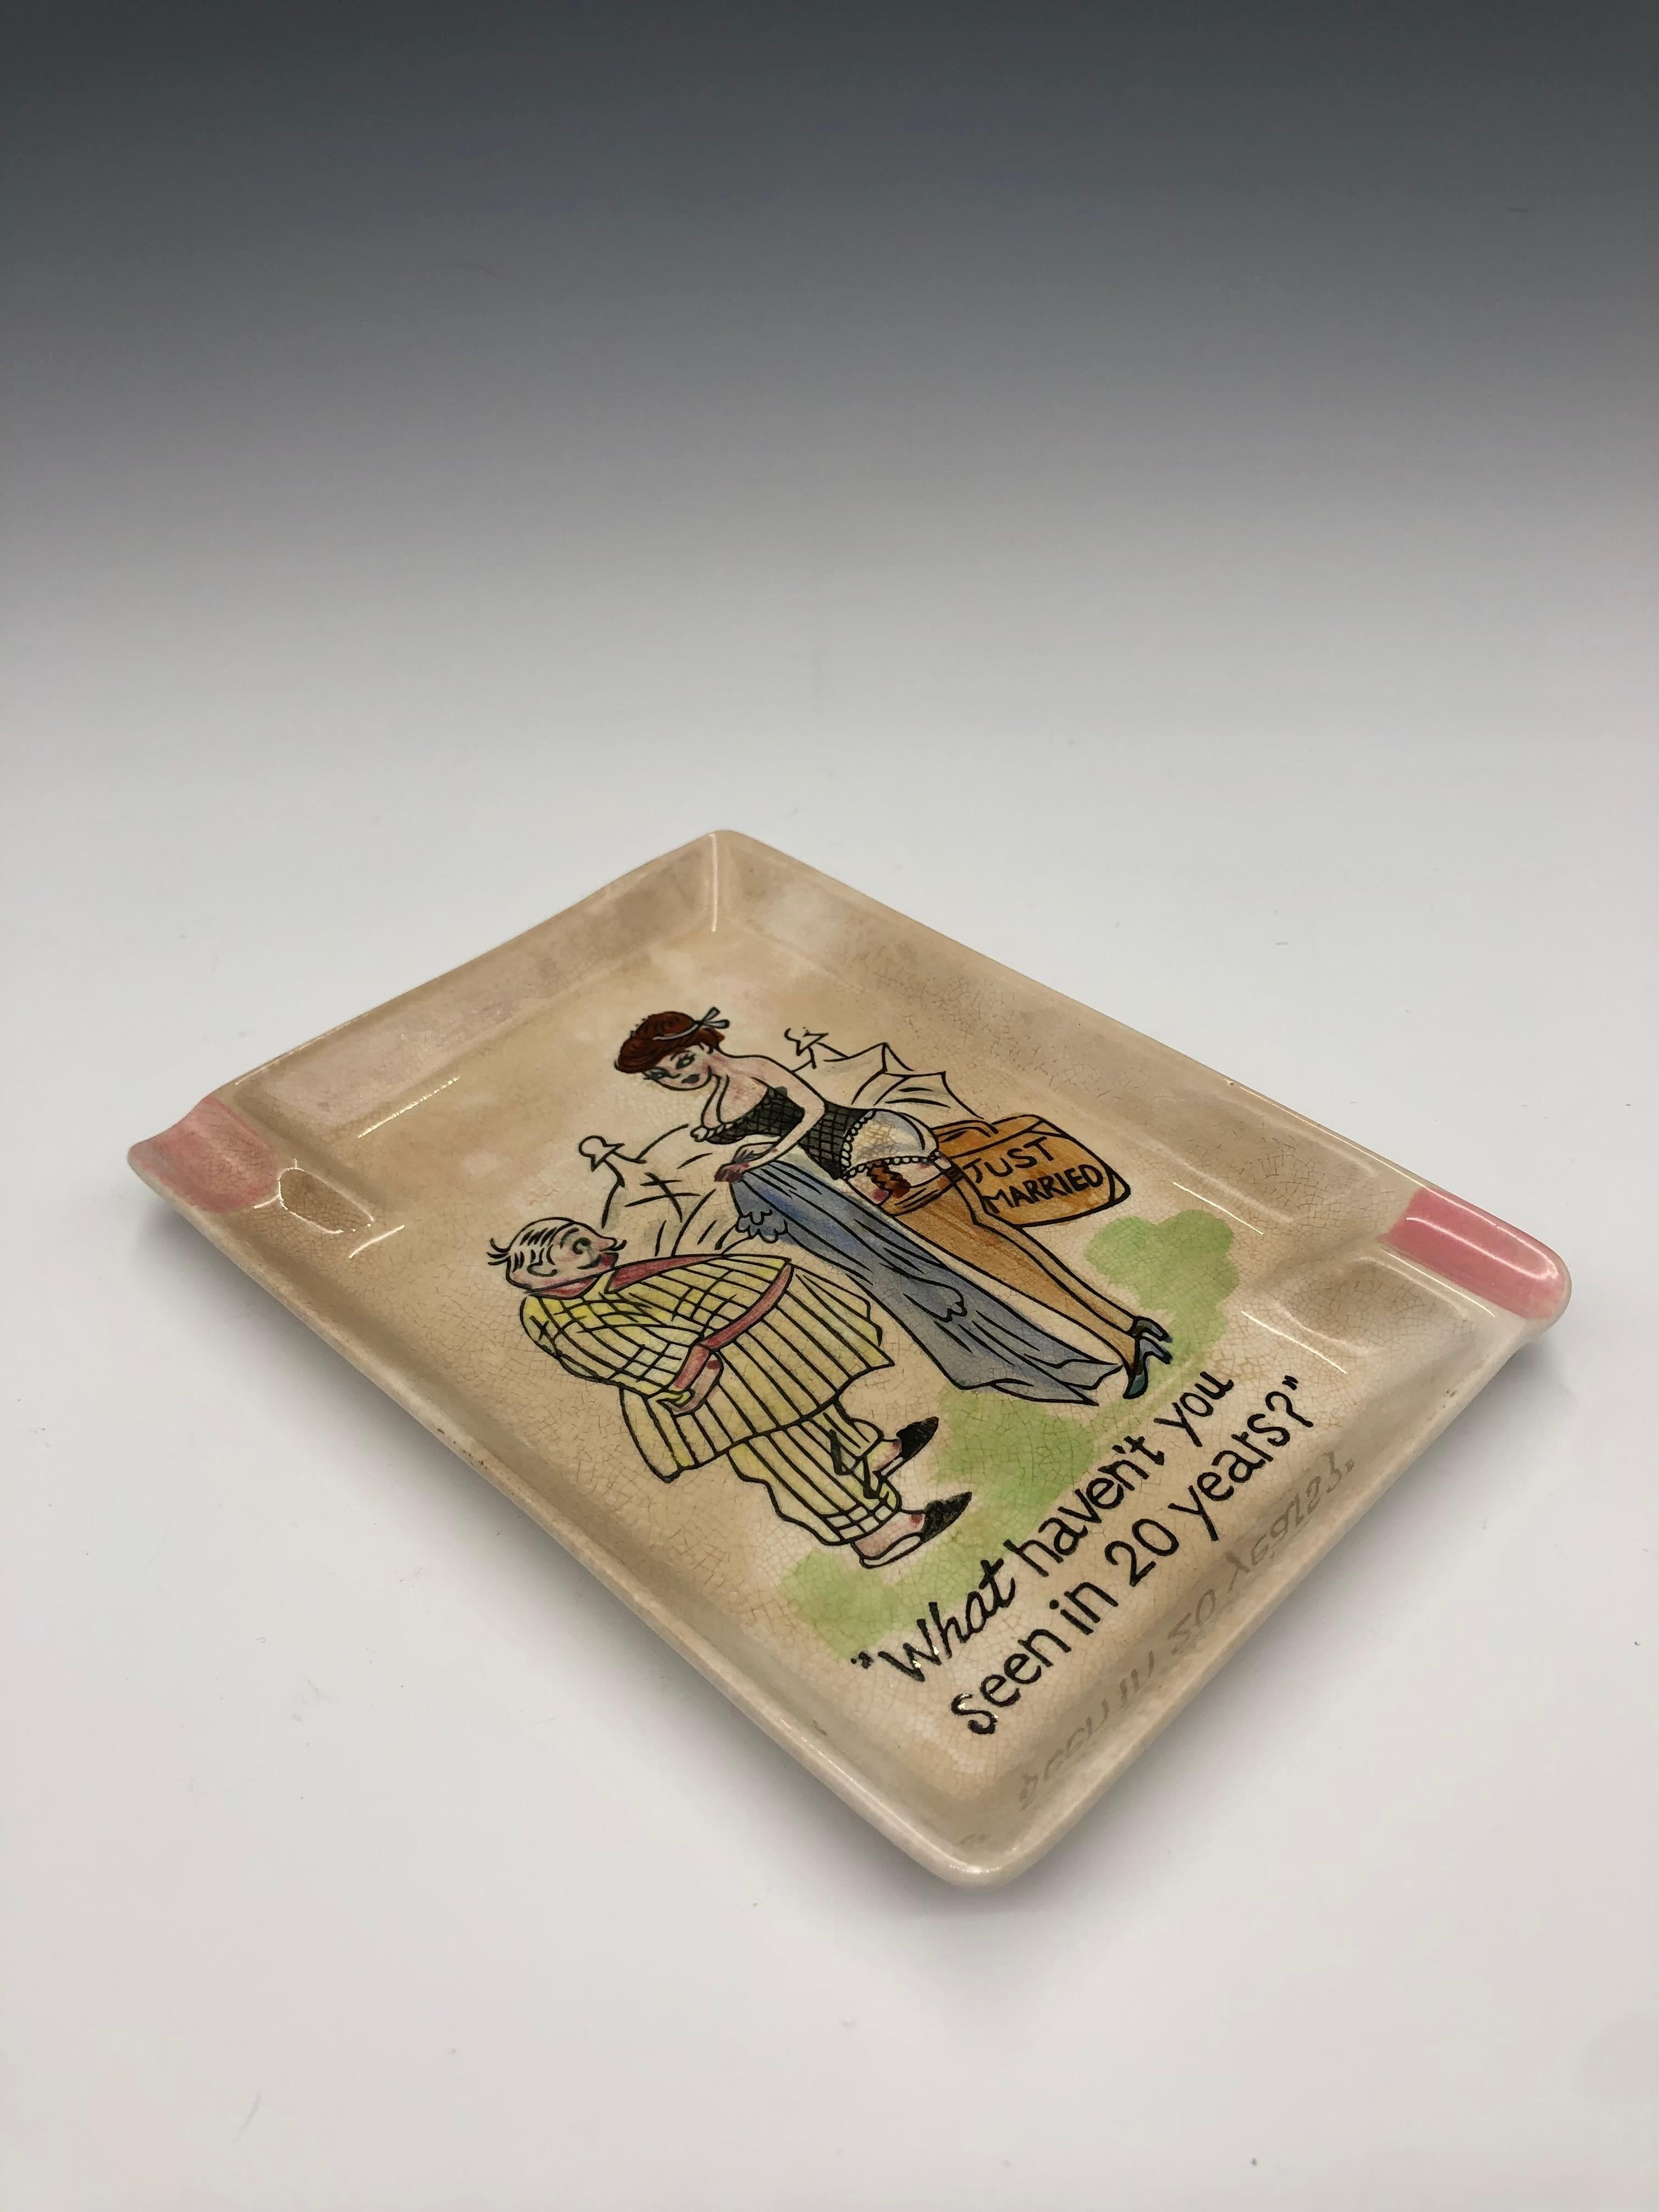 Figurative Sculpture Unknown - Vintage Comic Porcelain Ashtray, Catchall, Tray